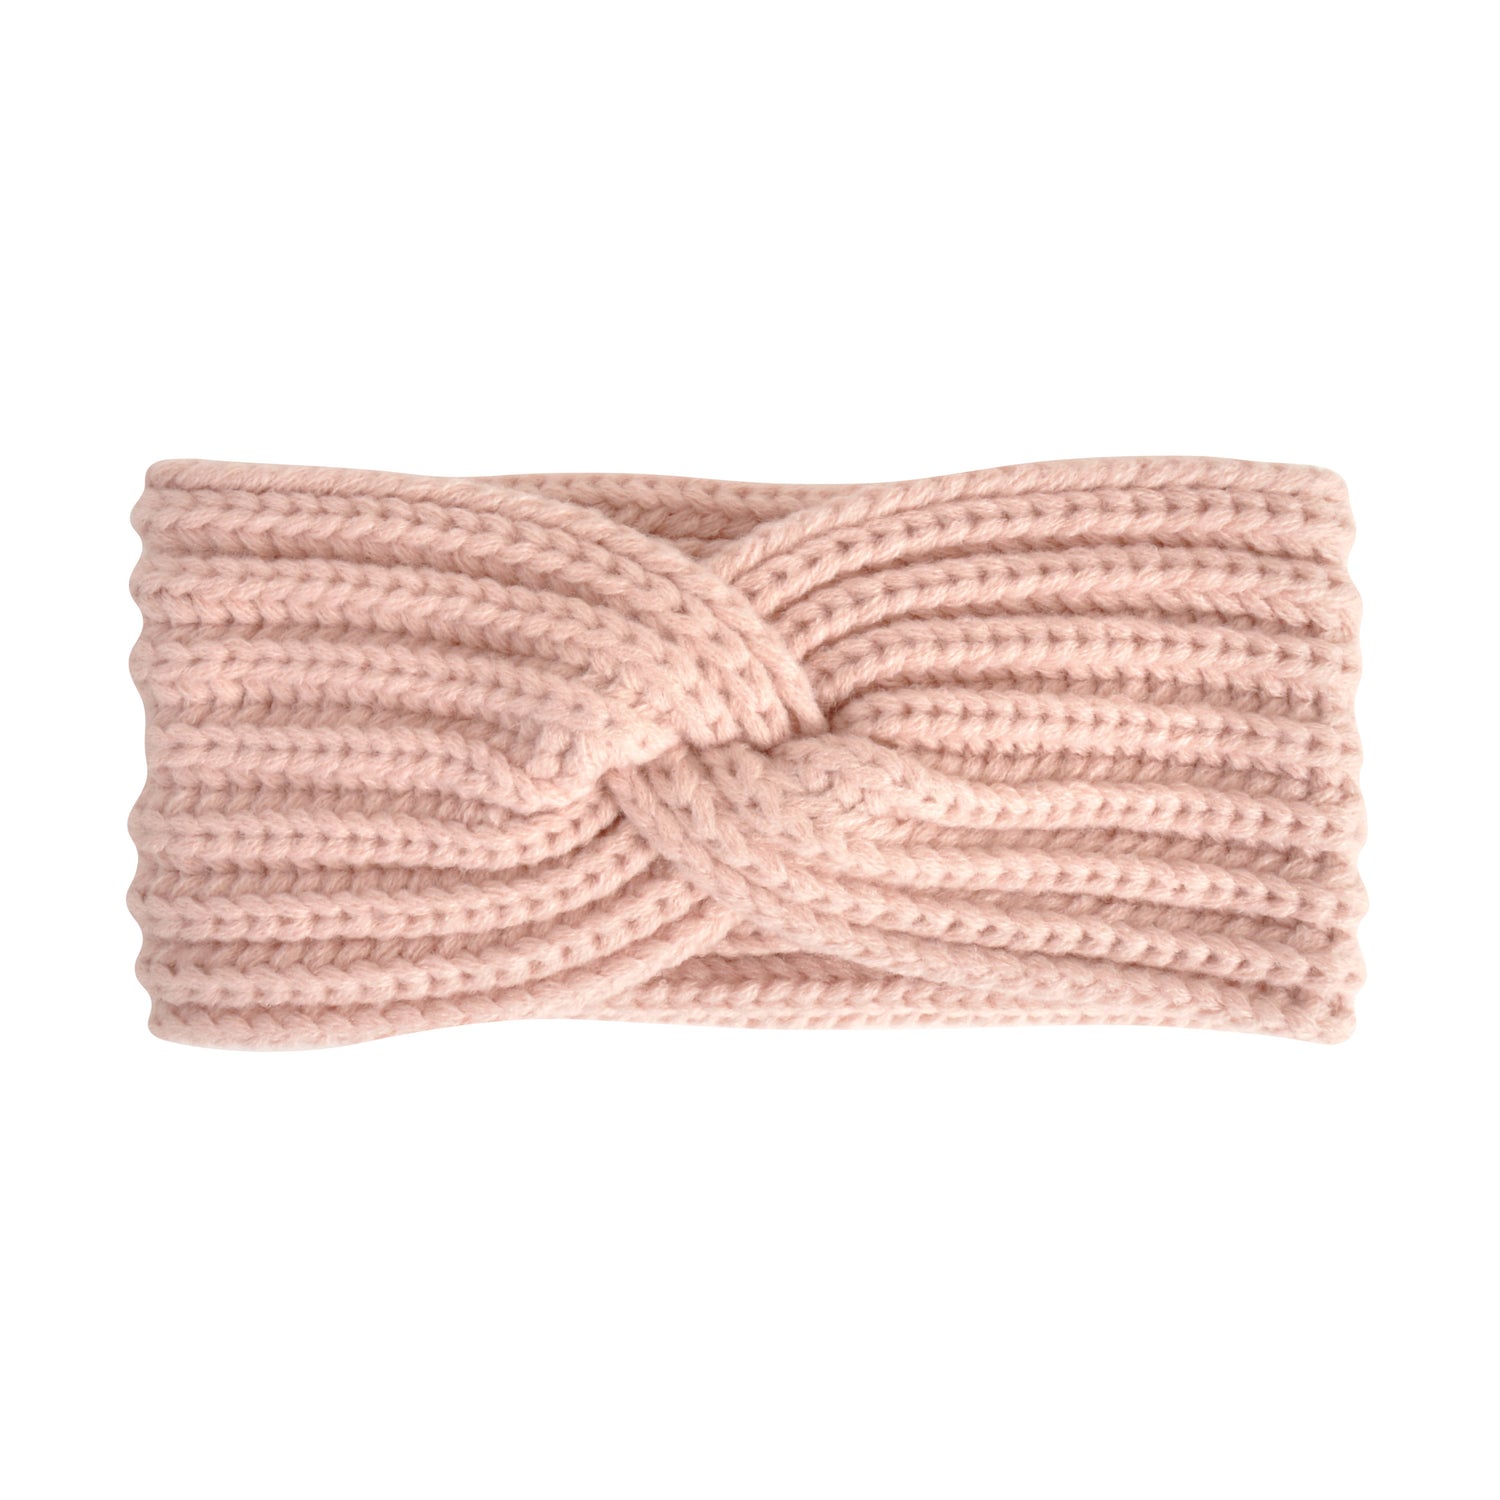 Fashion - Accessories - Knitted Headbands